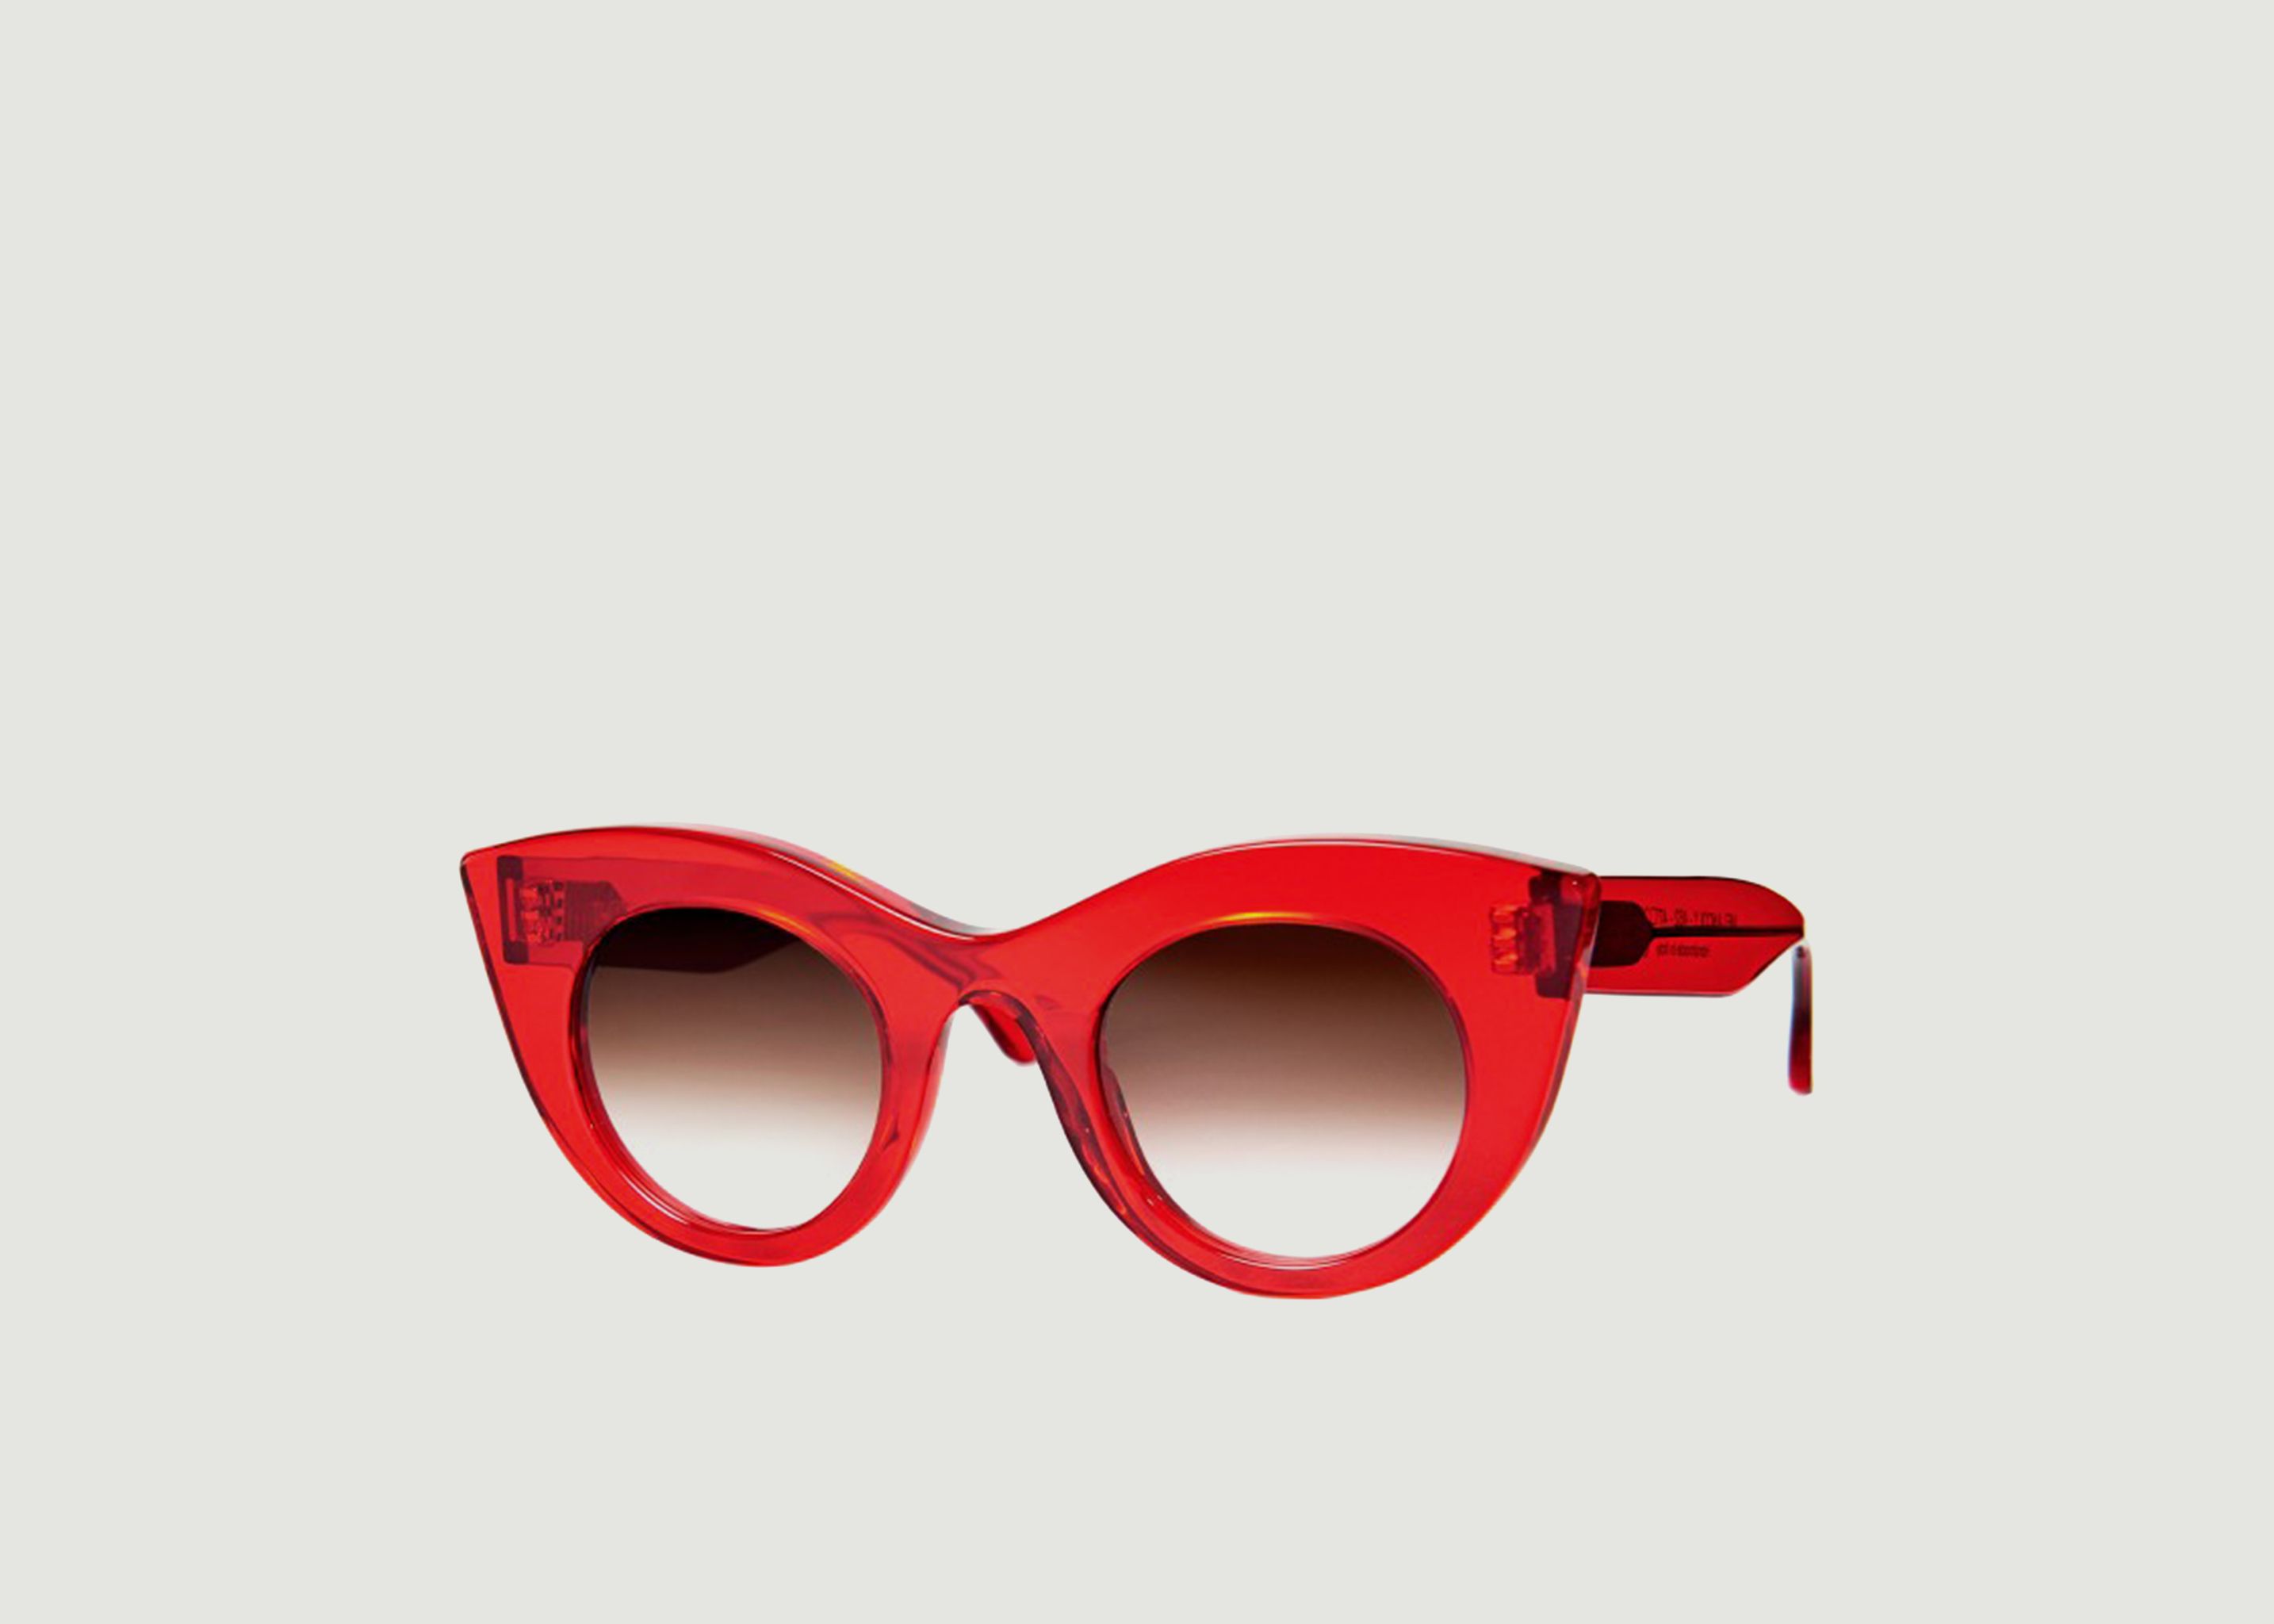 Melancoly Sunglasses - Thierry Lasry